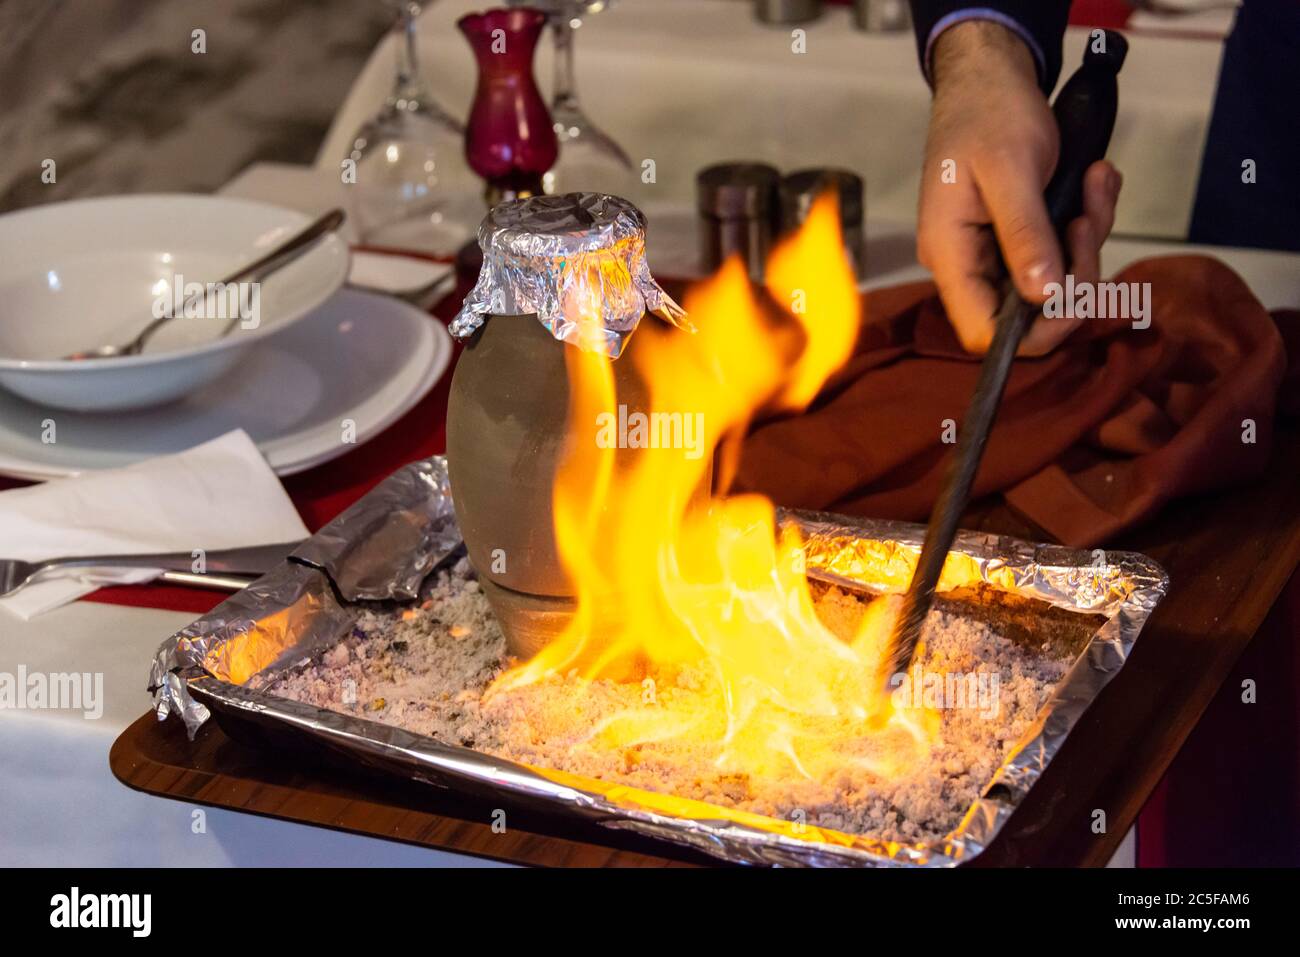 Testi Kebab is served with fire in a restaurant, Kebab braised in an earthenware pot, typical Turkish dish from Cappadocia, Istanbul, Turkey Stock Photo